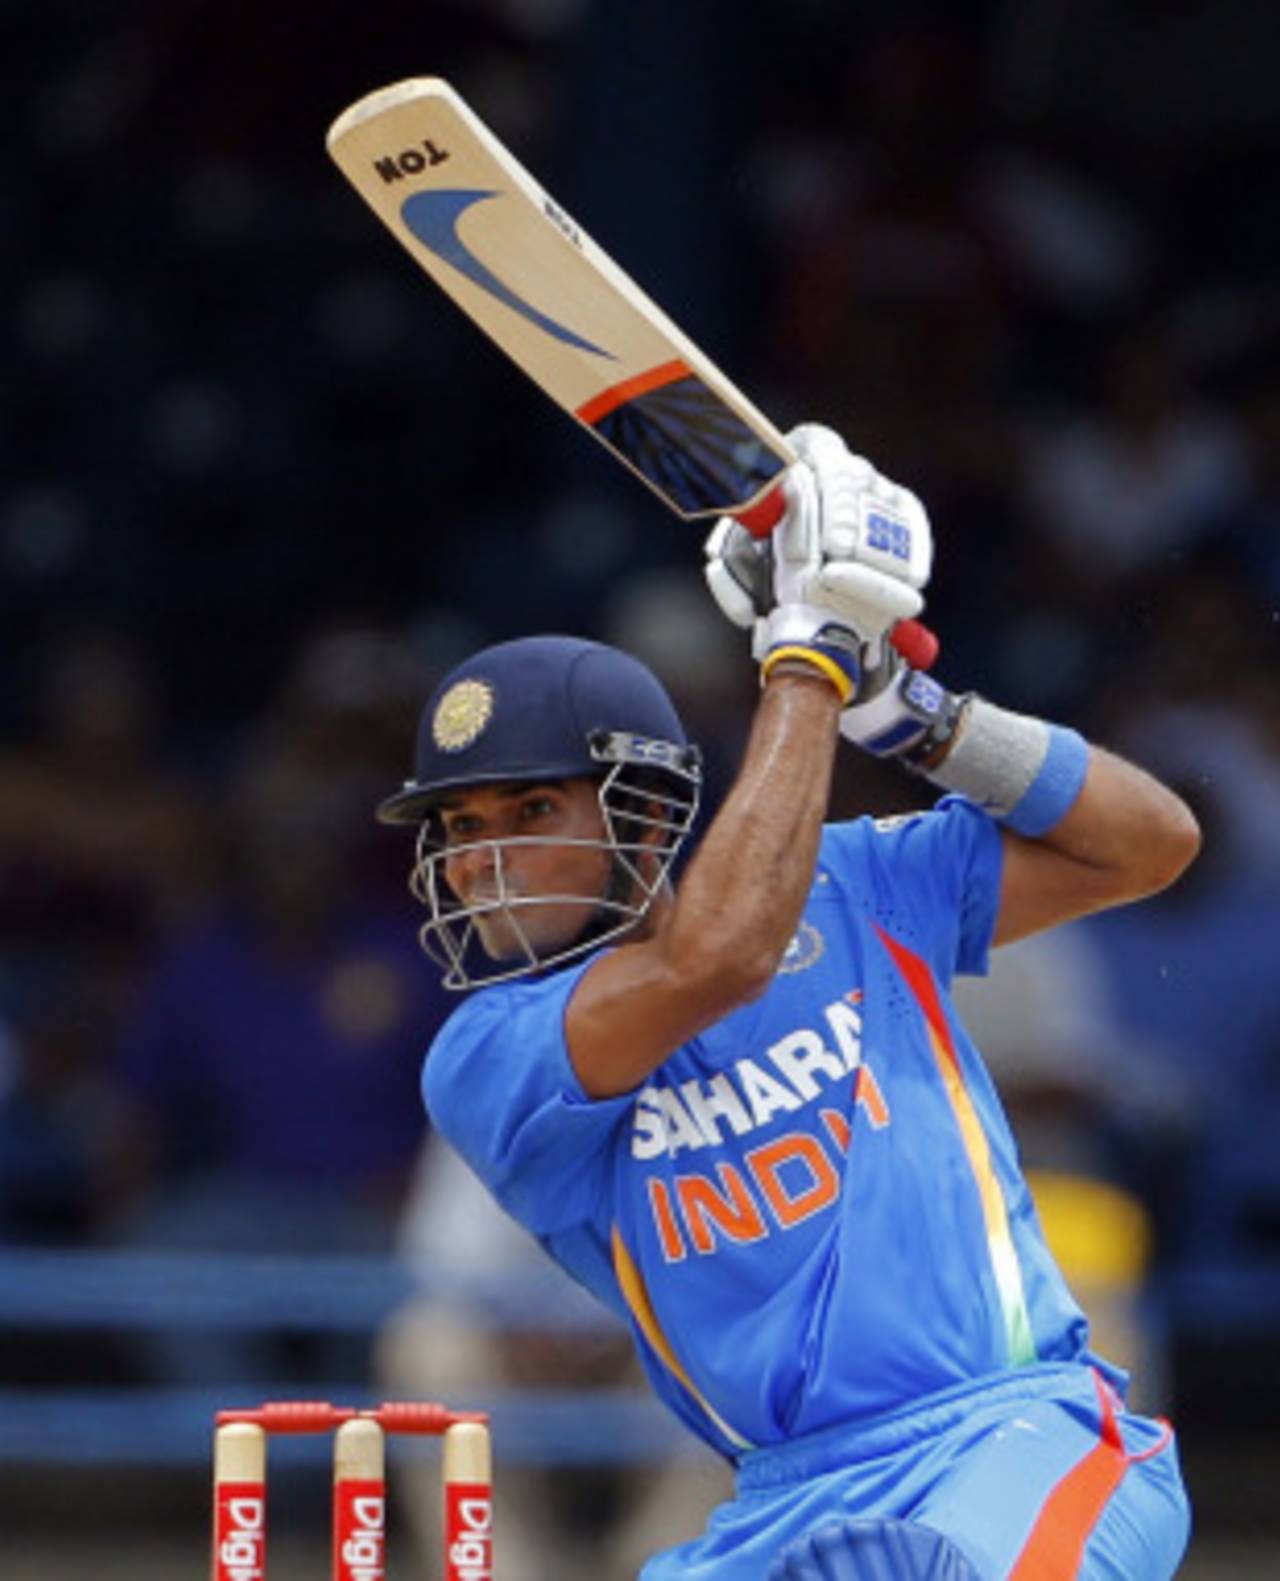 S Badrinath hoists an extra-cover drive, West Indies v India, Only Twenty20, Port of Spain, June 4, 2011